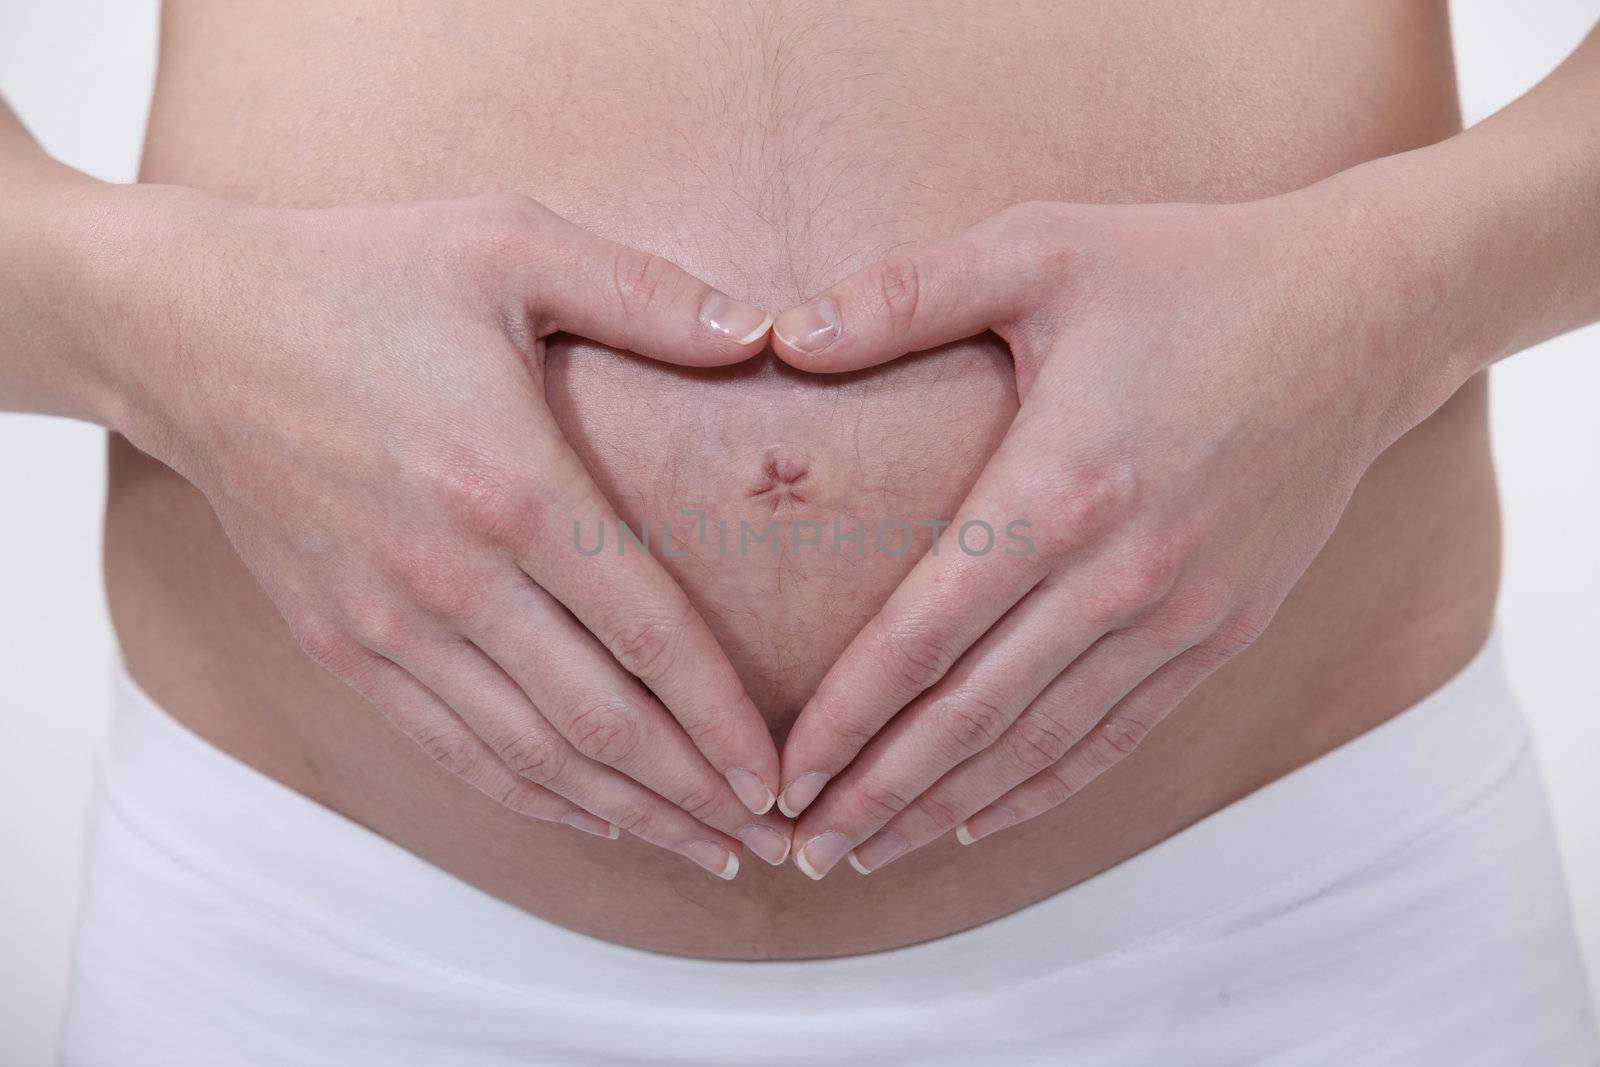 Pregnant woman making a heart shape on her stomach by phovoir